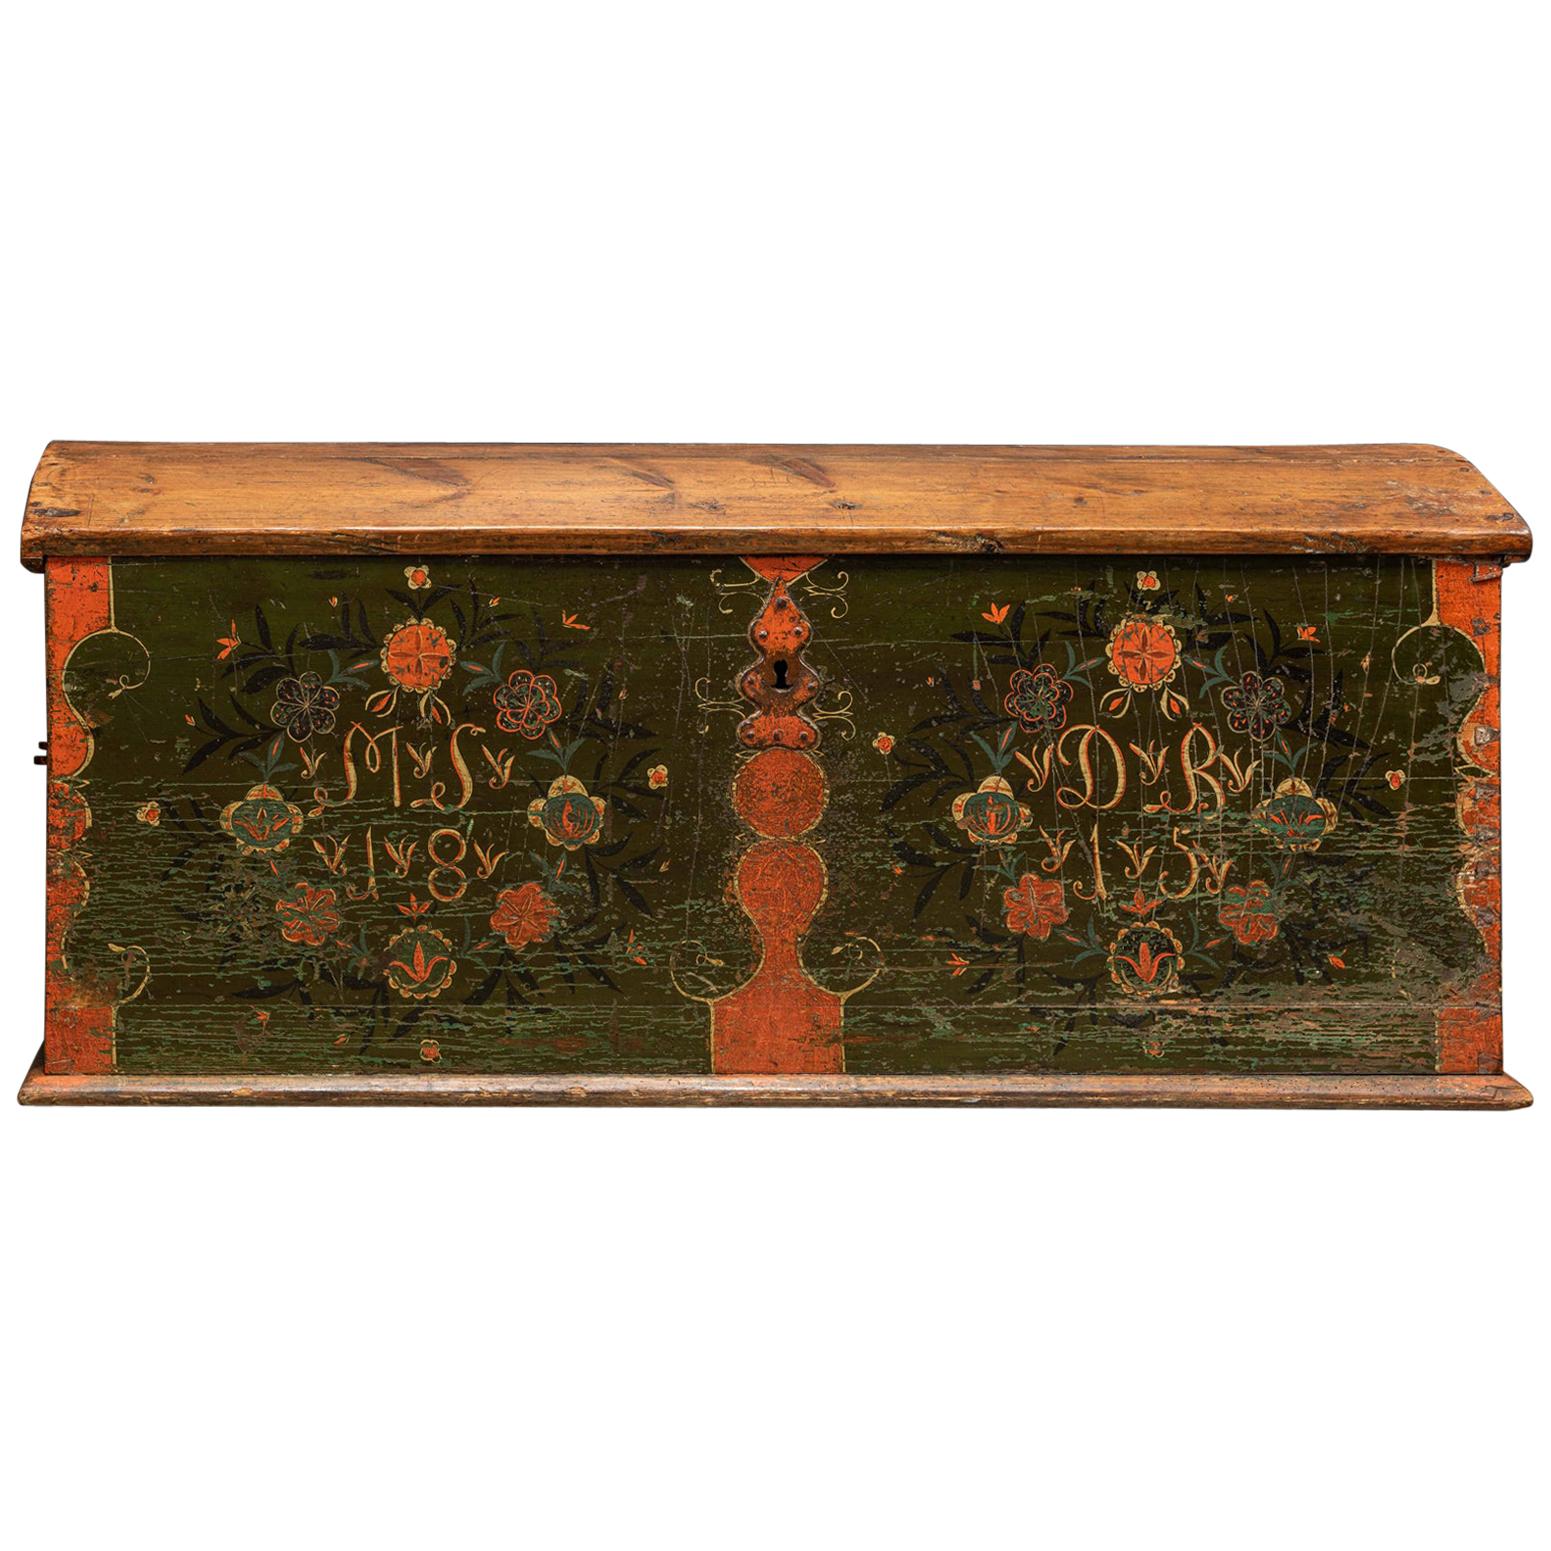 Early 19th Century Swedish Marriage/Dowry Chest For Sale